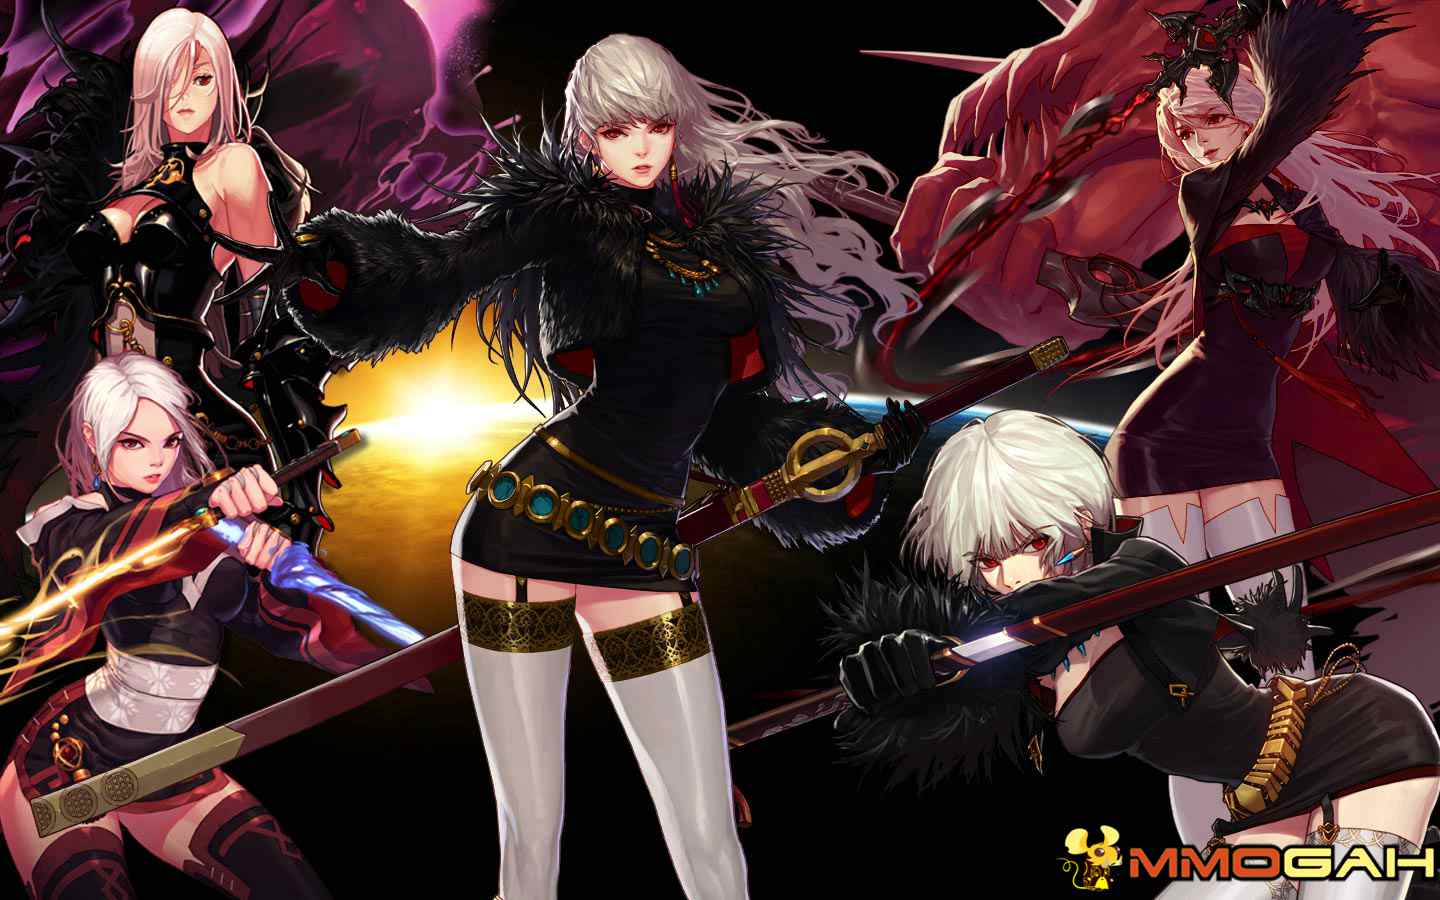 The Ranking of the 4 Professions of Female Slayer in Dungeon Fighter Online.